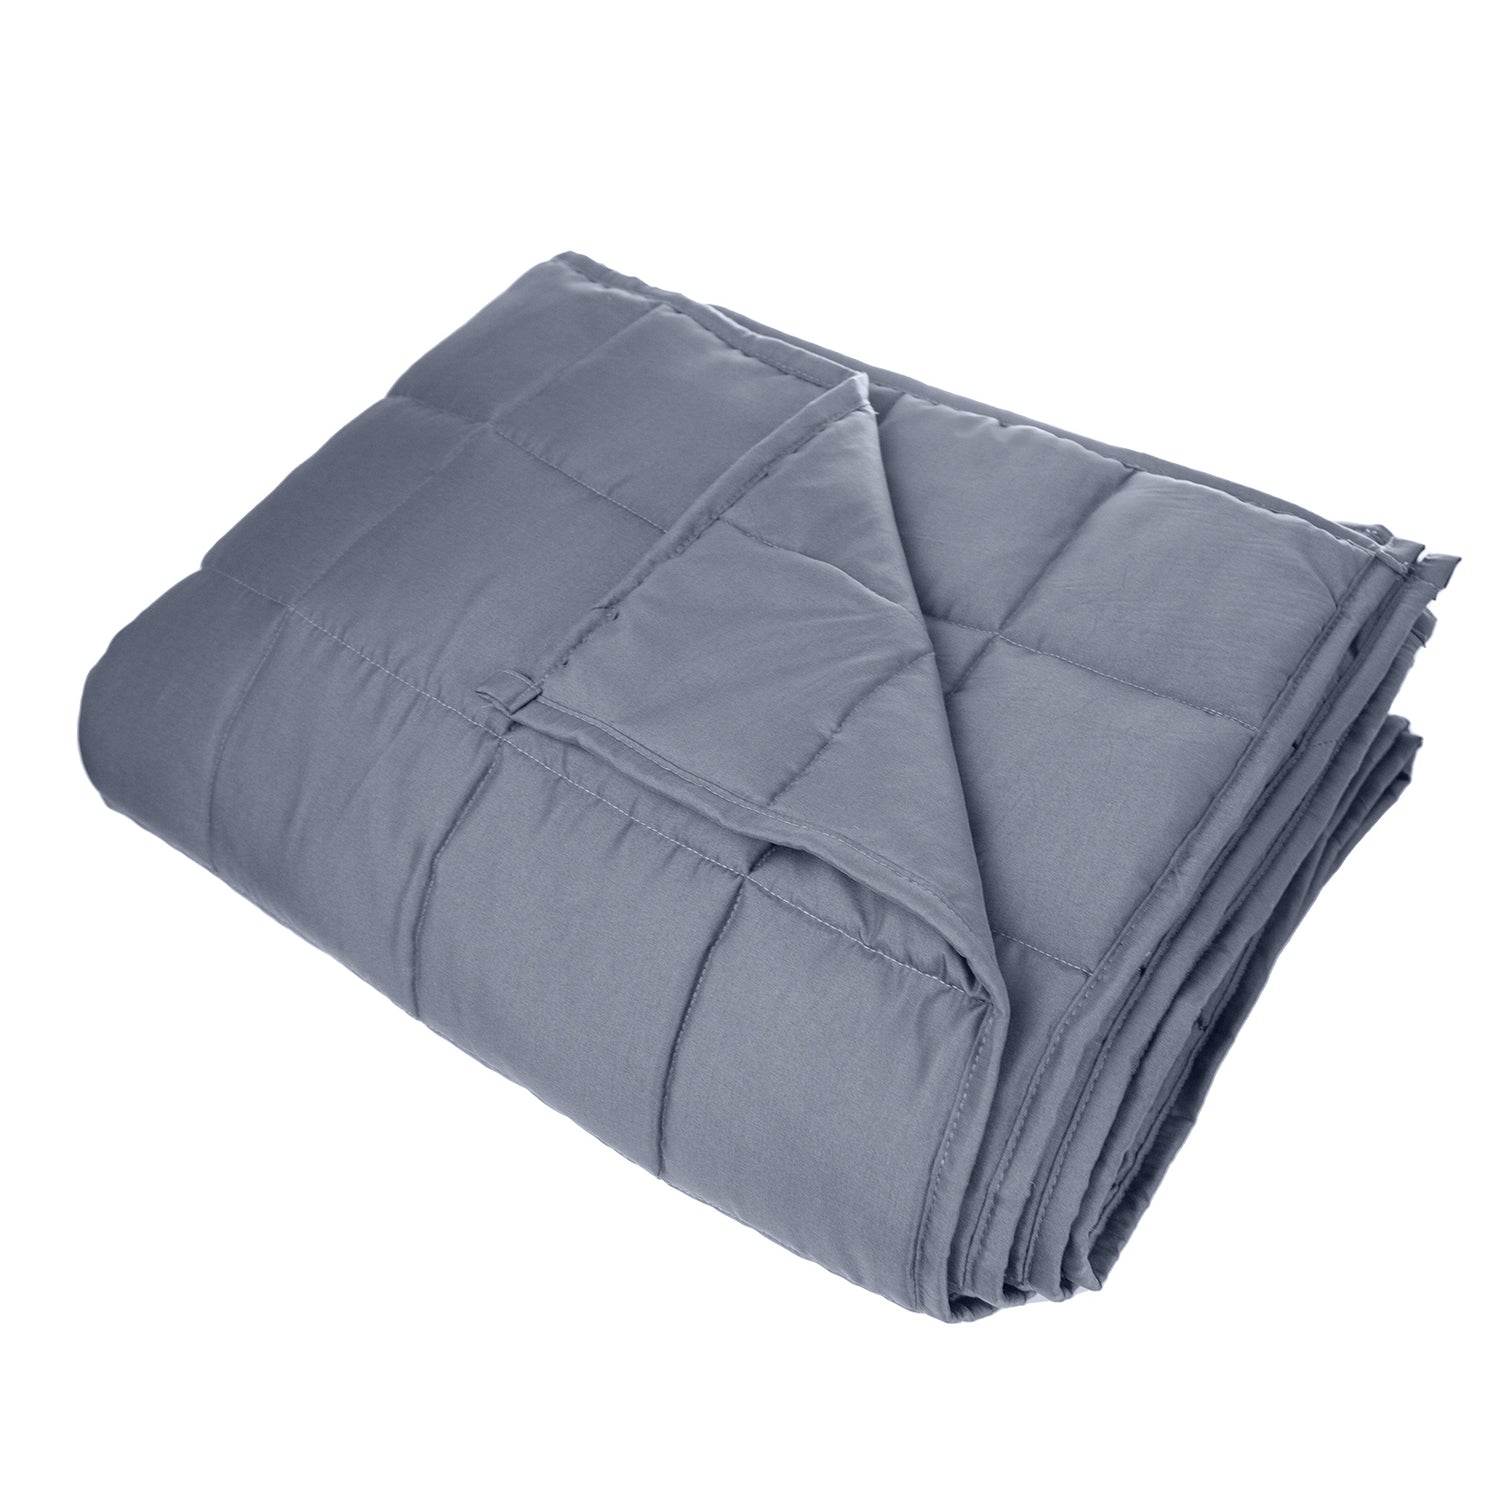 Royal Comfort Weighted Gravity Blanket 7KG Size Relax Ultra Soft-Bedding-PEROZ Accessories